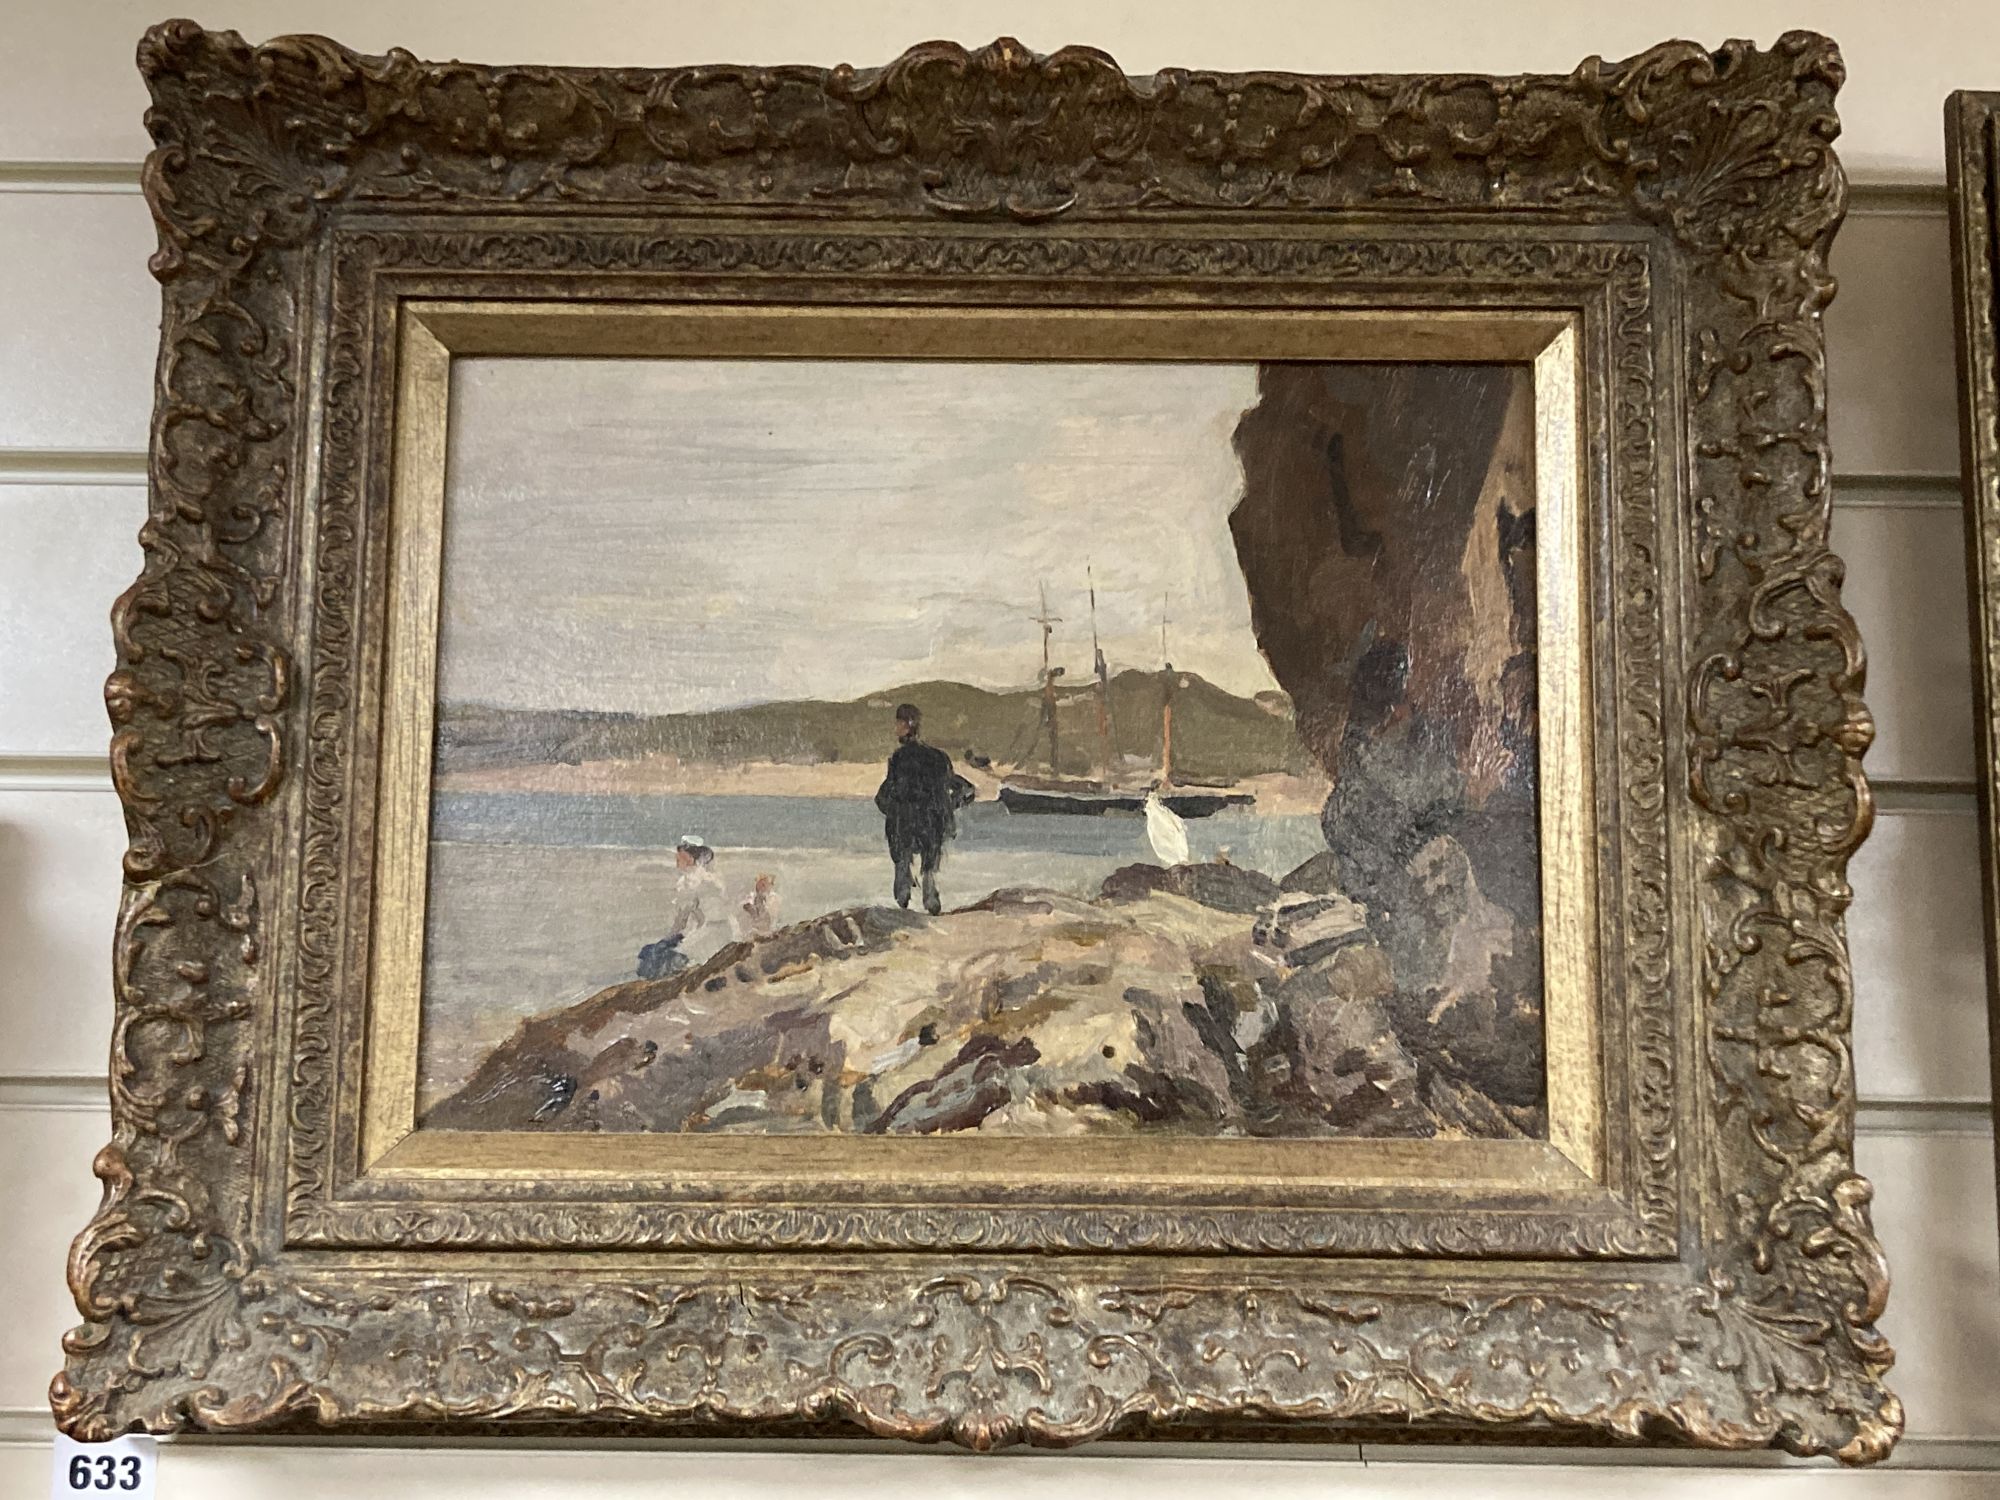 Attributed to Walter Bayes (1869-1956), oil on board, Figures on the shore, a three master beyond, 25 x 34cm